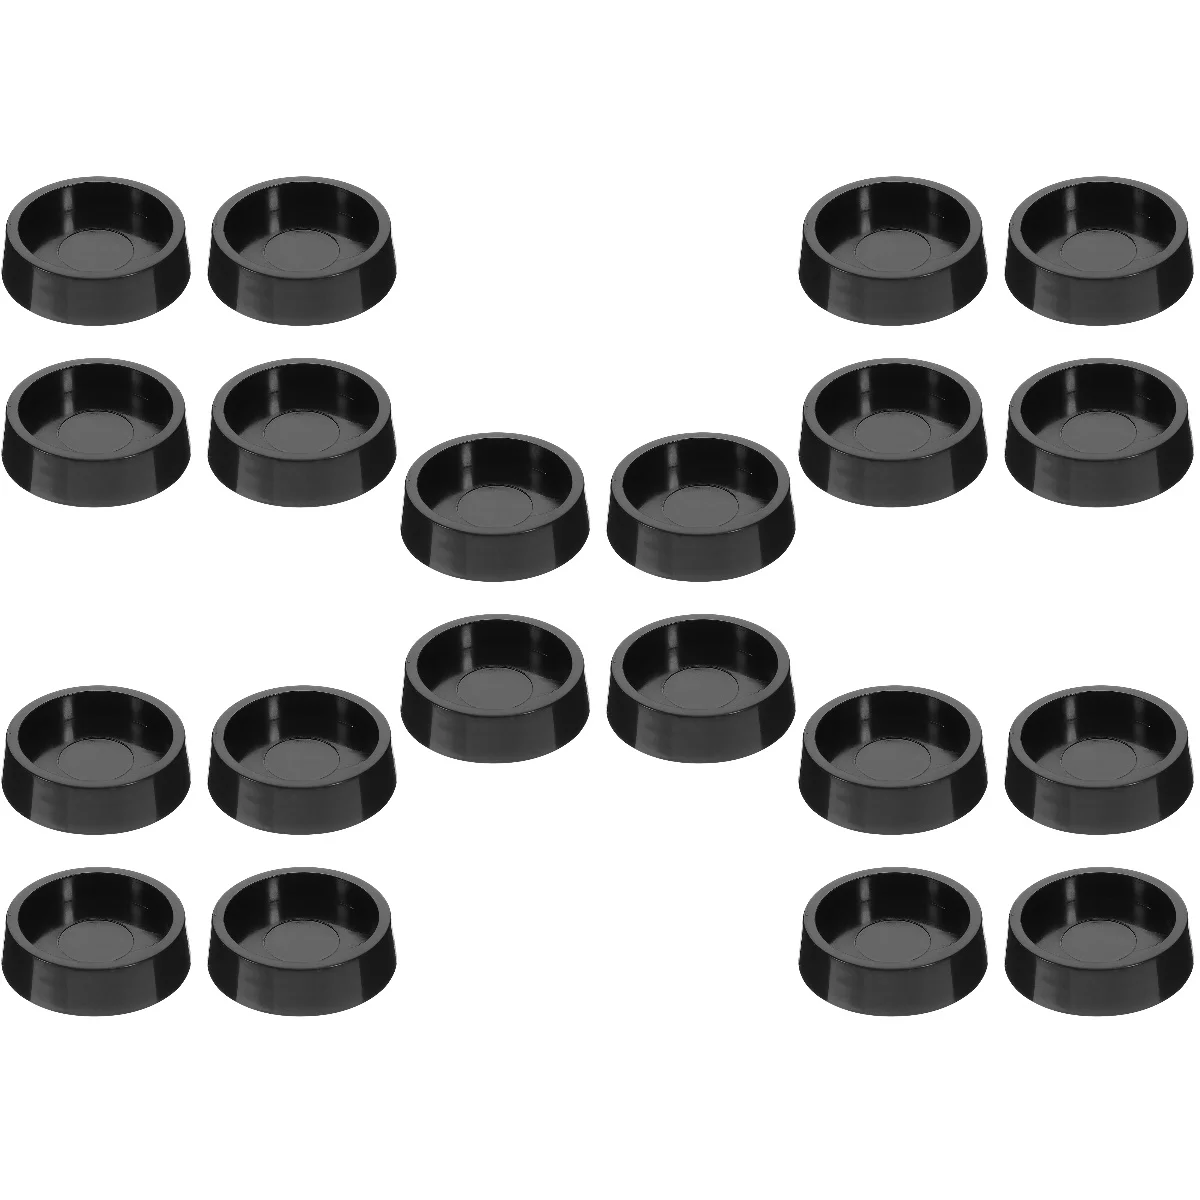 

20 Pcs Circle Chair Floor Mat Baby Bed Wheel Stopper Hand Pad 5X5CM Protector Furniture Leg Black Plastic Carriage Caster